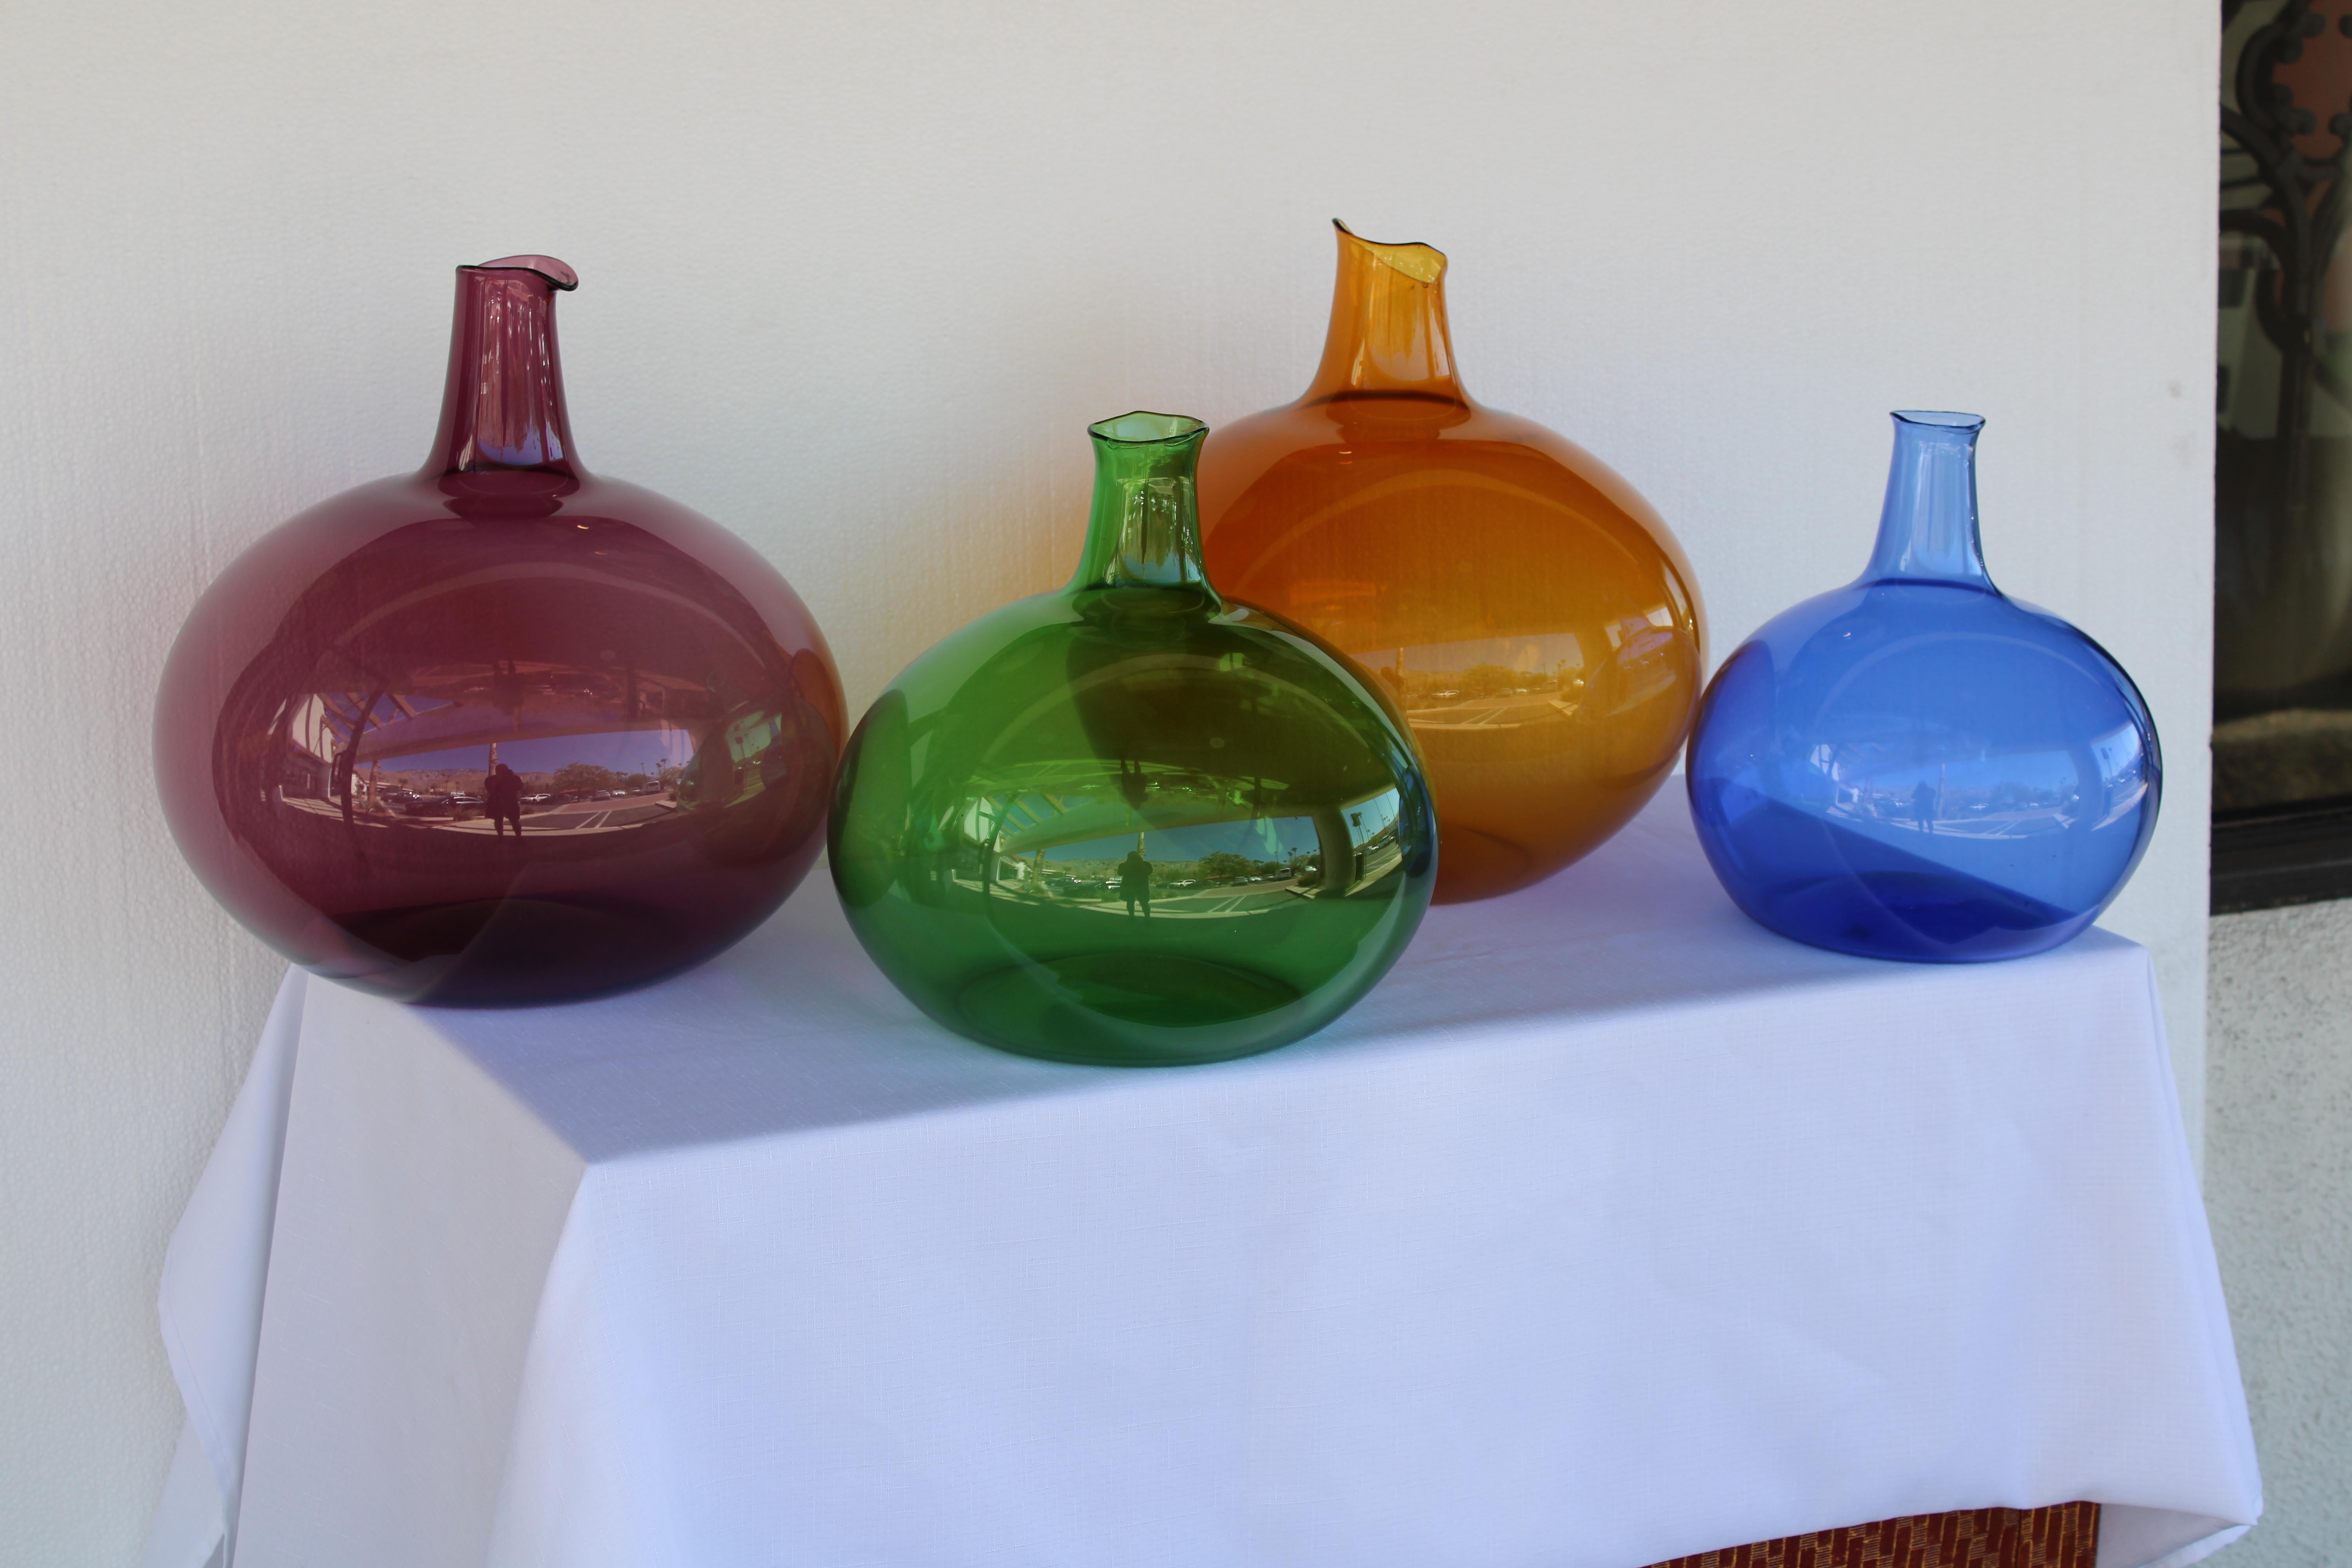 Four hand blown glass vessels by the Zeller Glass Company, Morgantown, West Virginia.  The caramel vessel measures 15